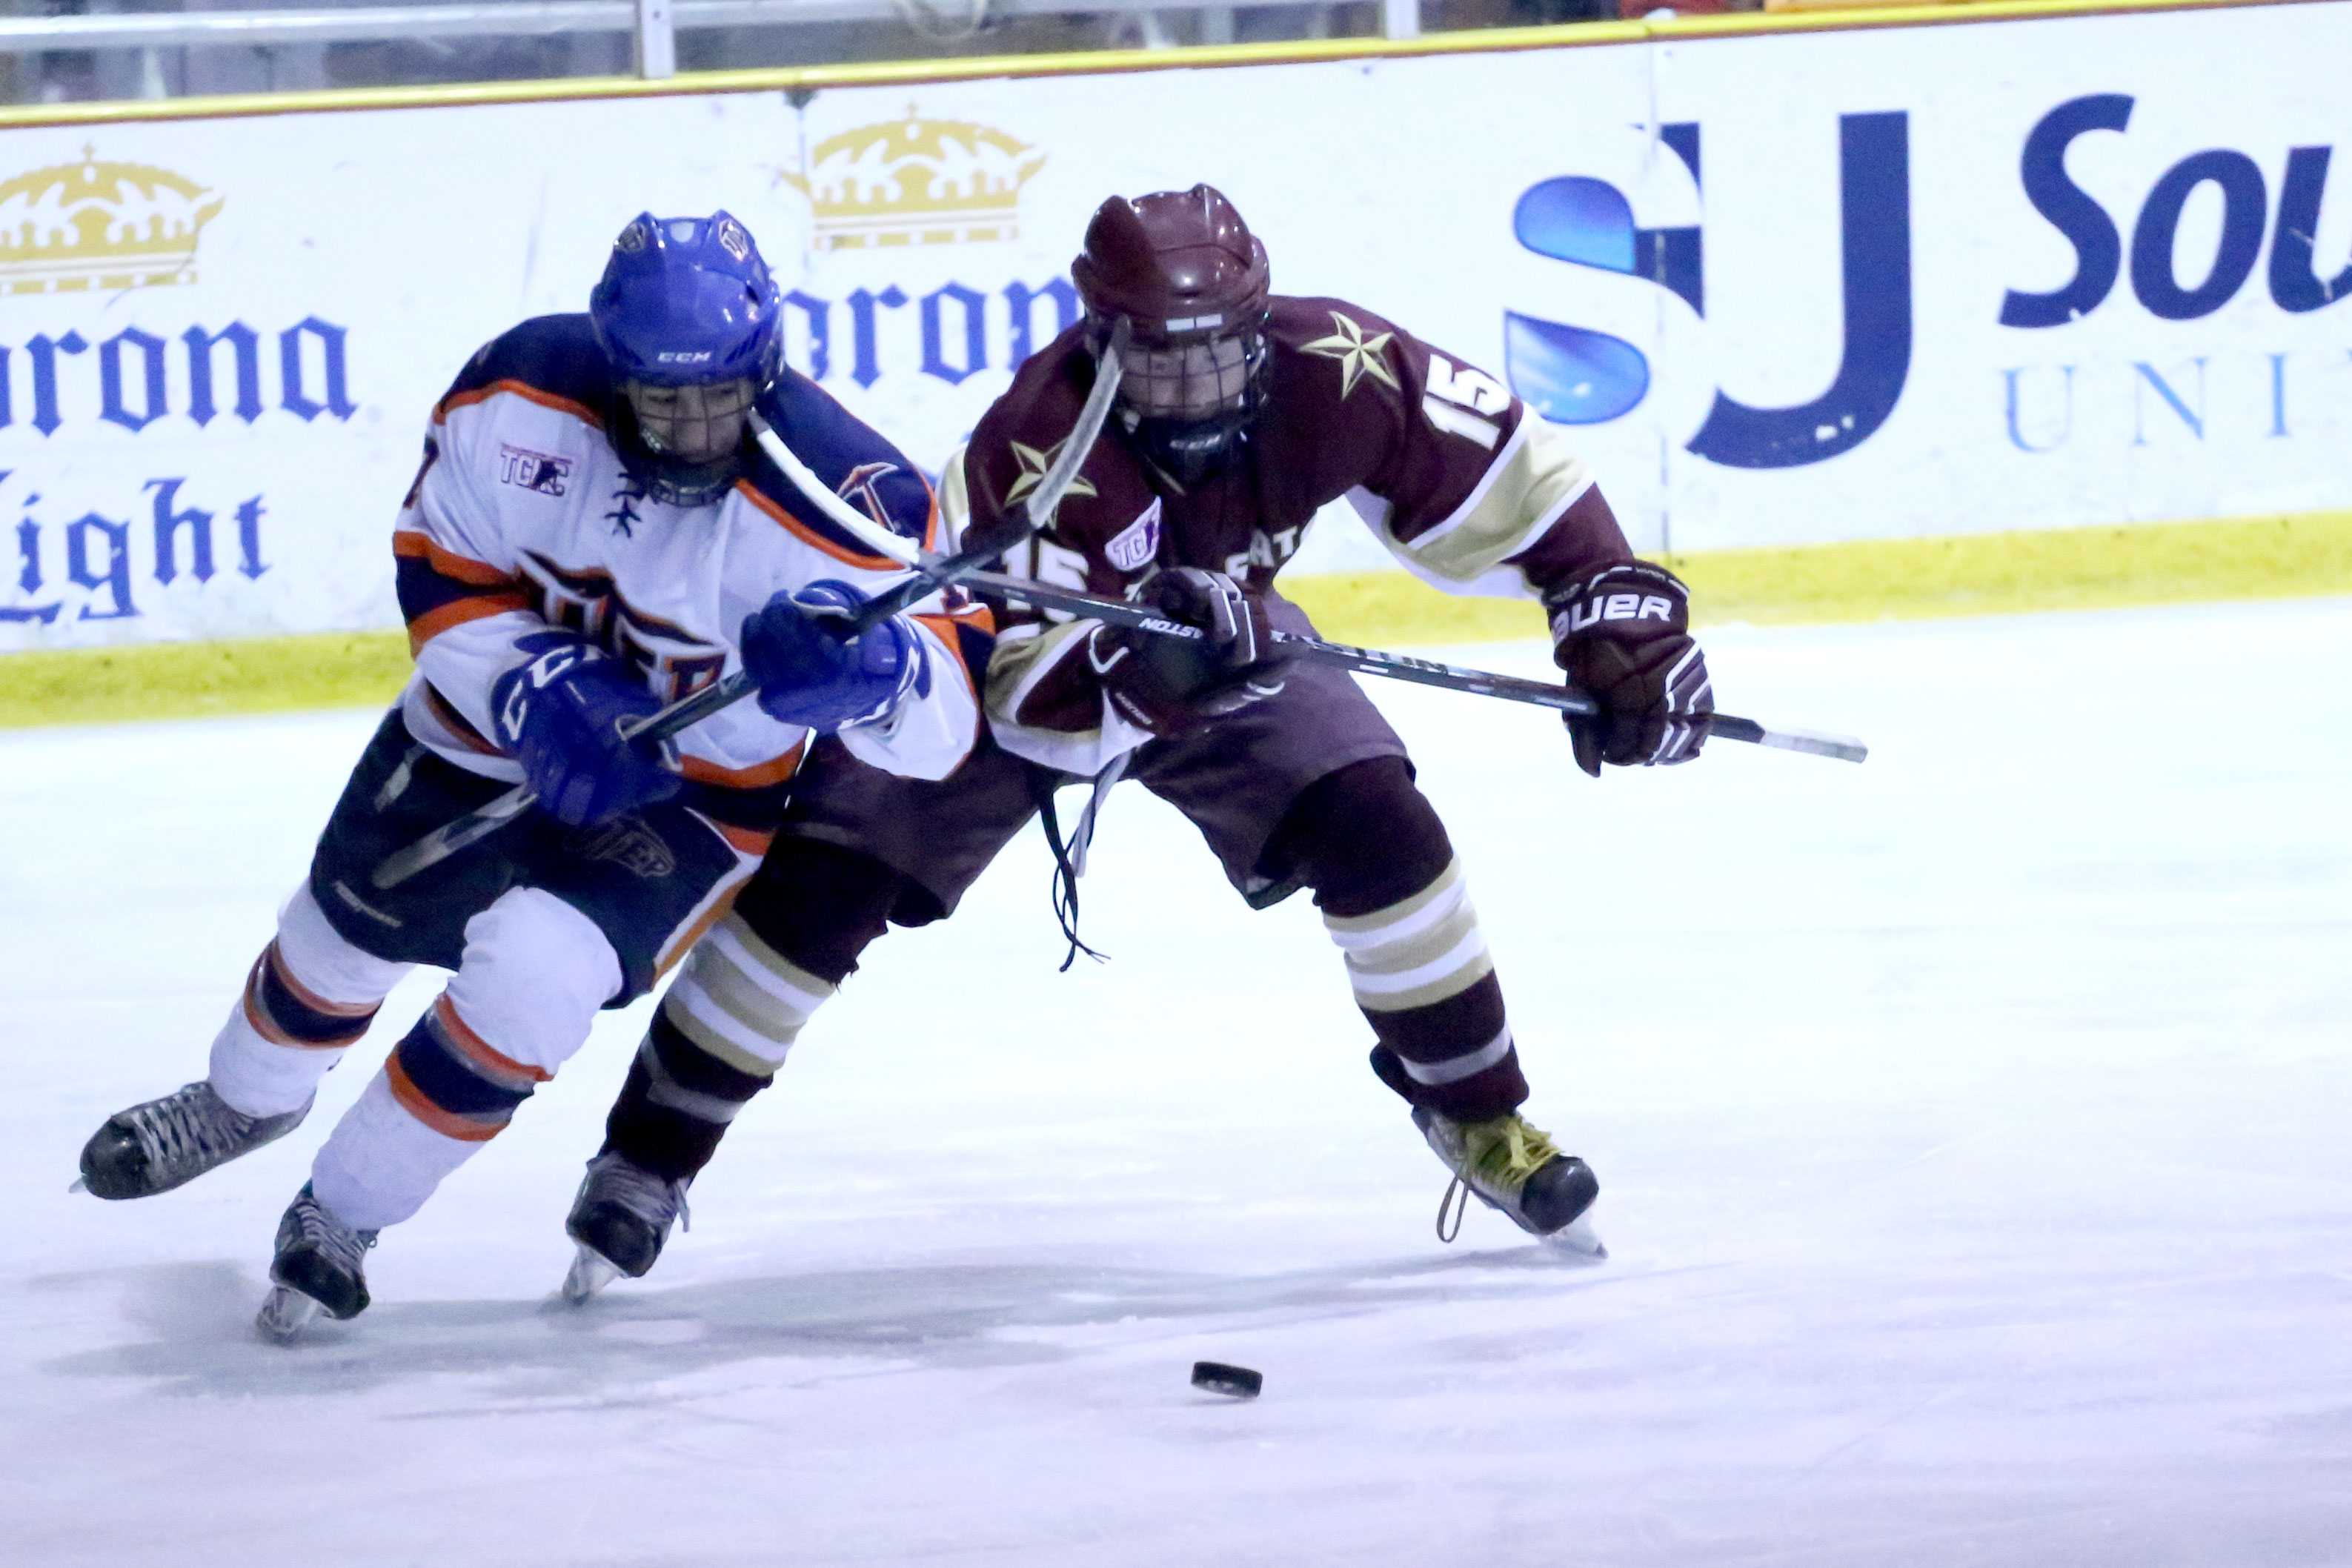 UTEP hockey storms back to defeat Texas A&M, advance in TCHC playoffs